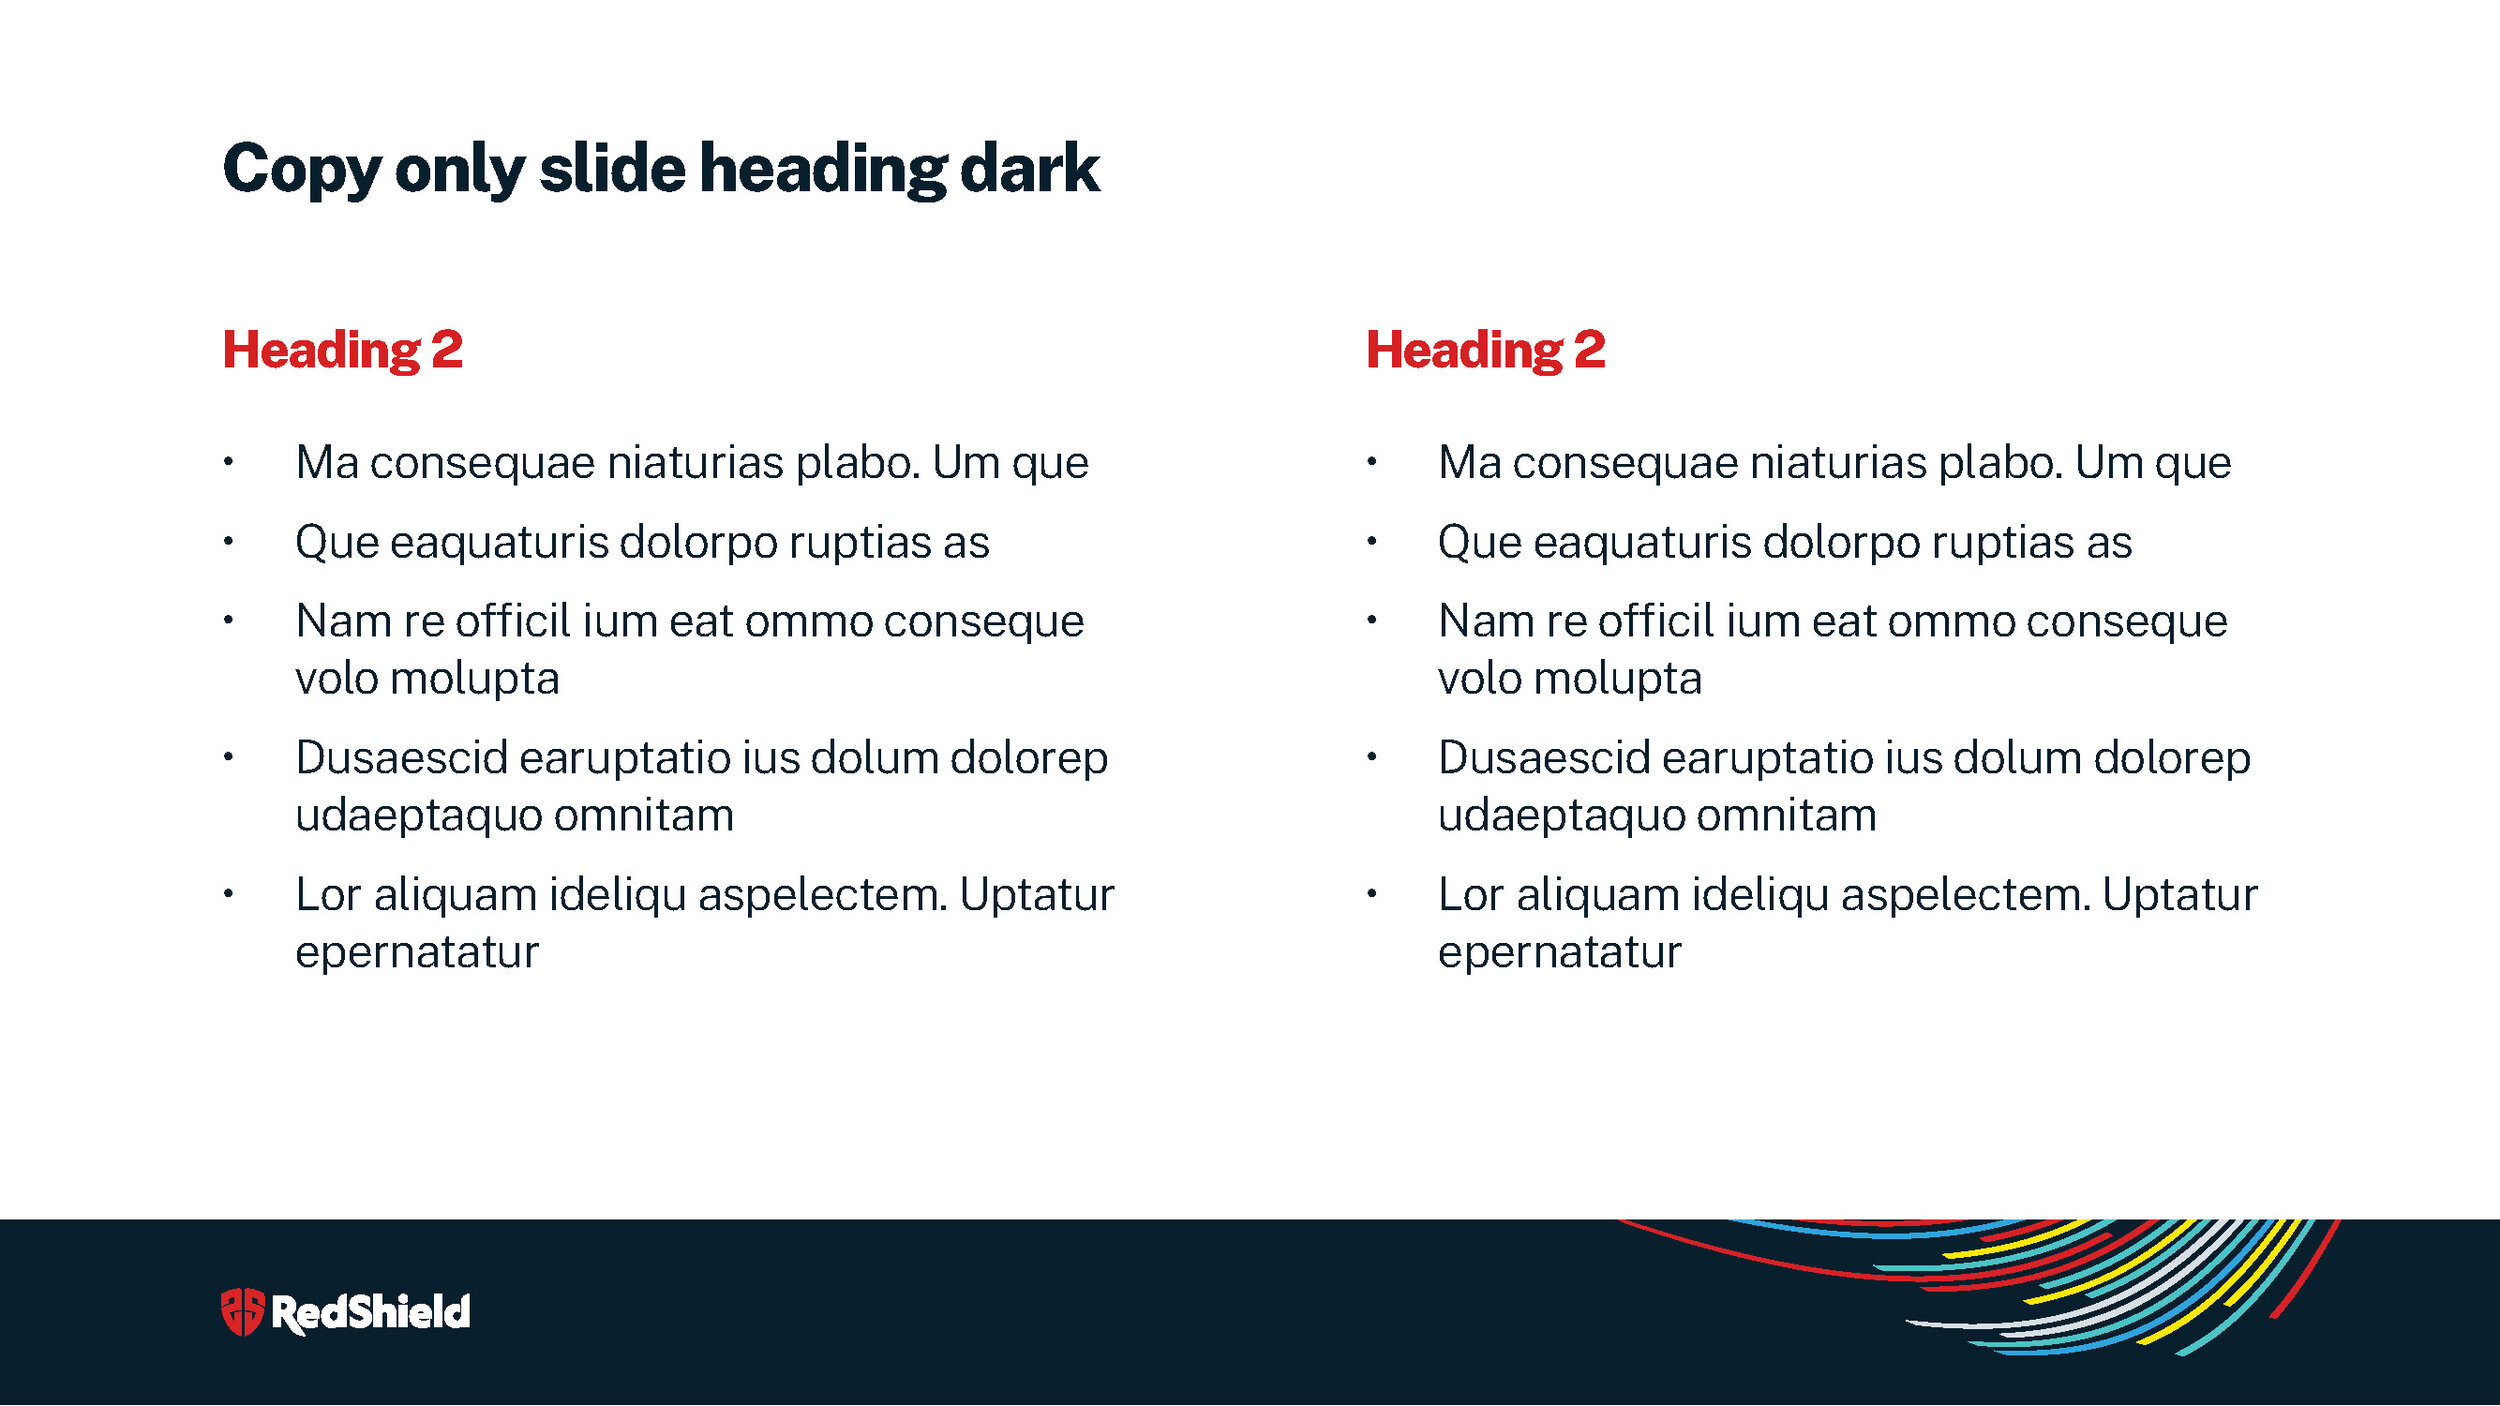 RedShield_PPT Template_Page_09.jpg